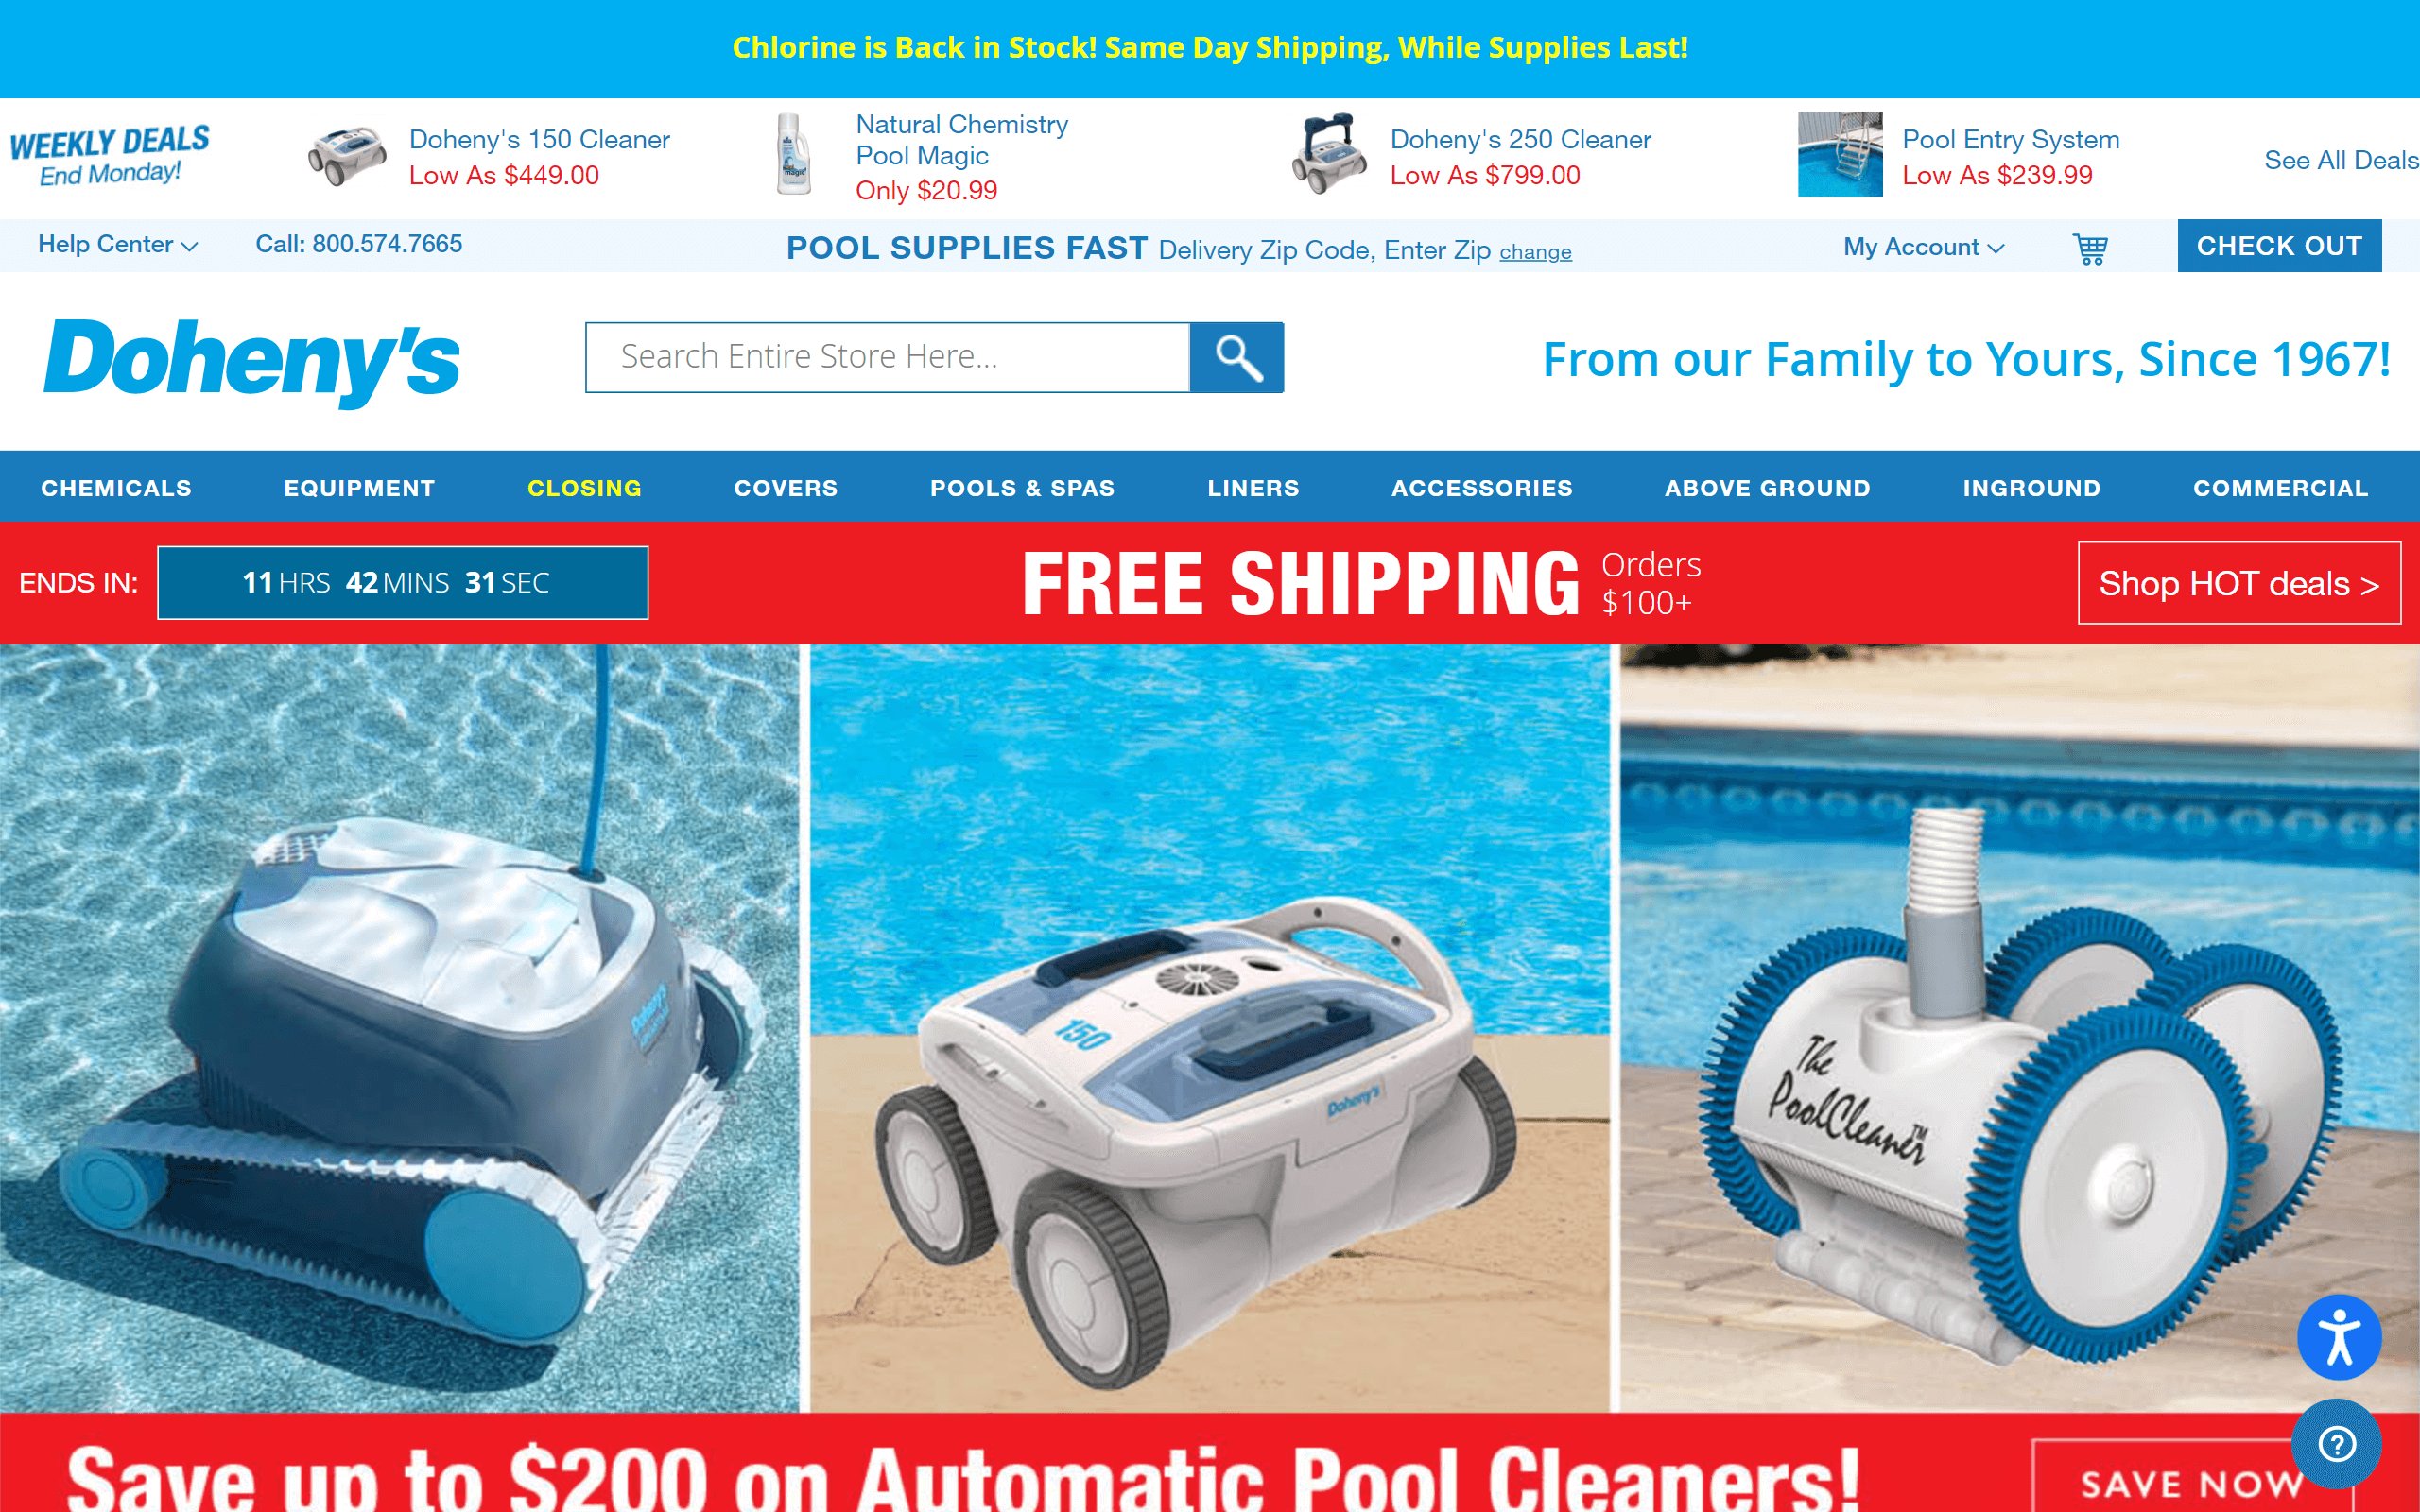 Doheny's Pool Supplies on ReadSomeReviews